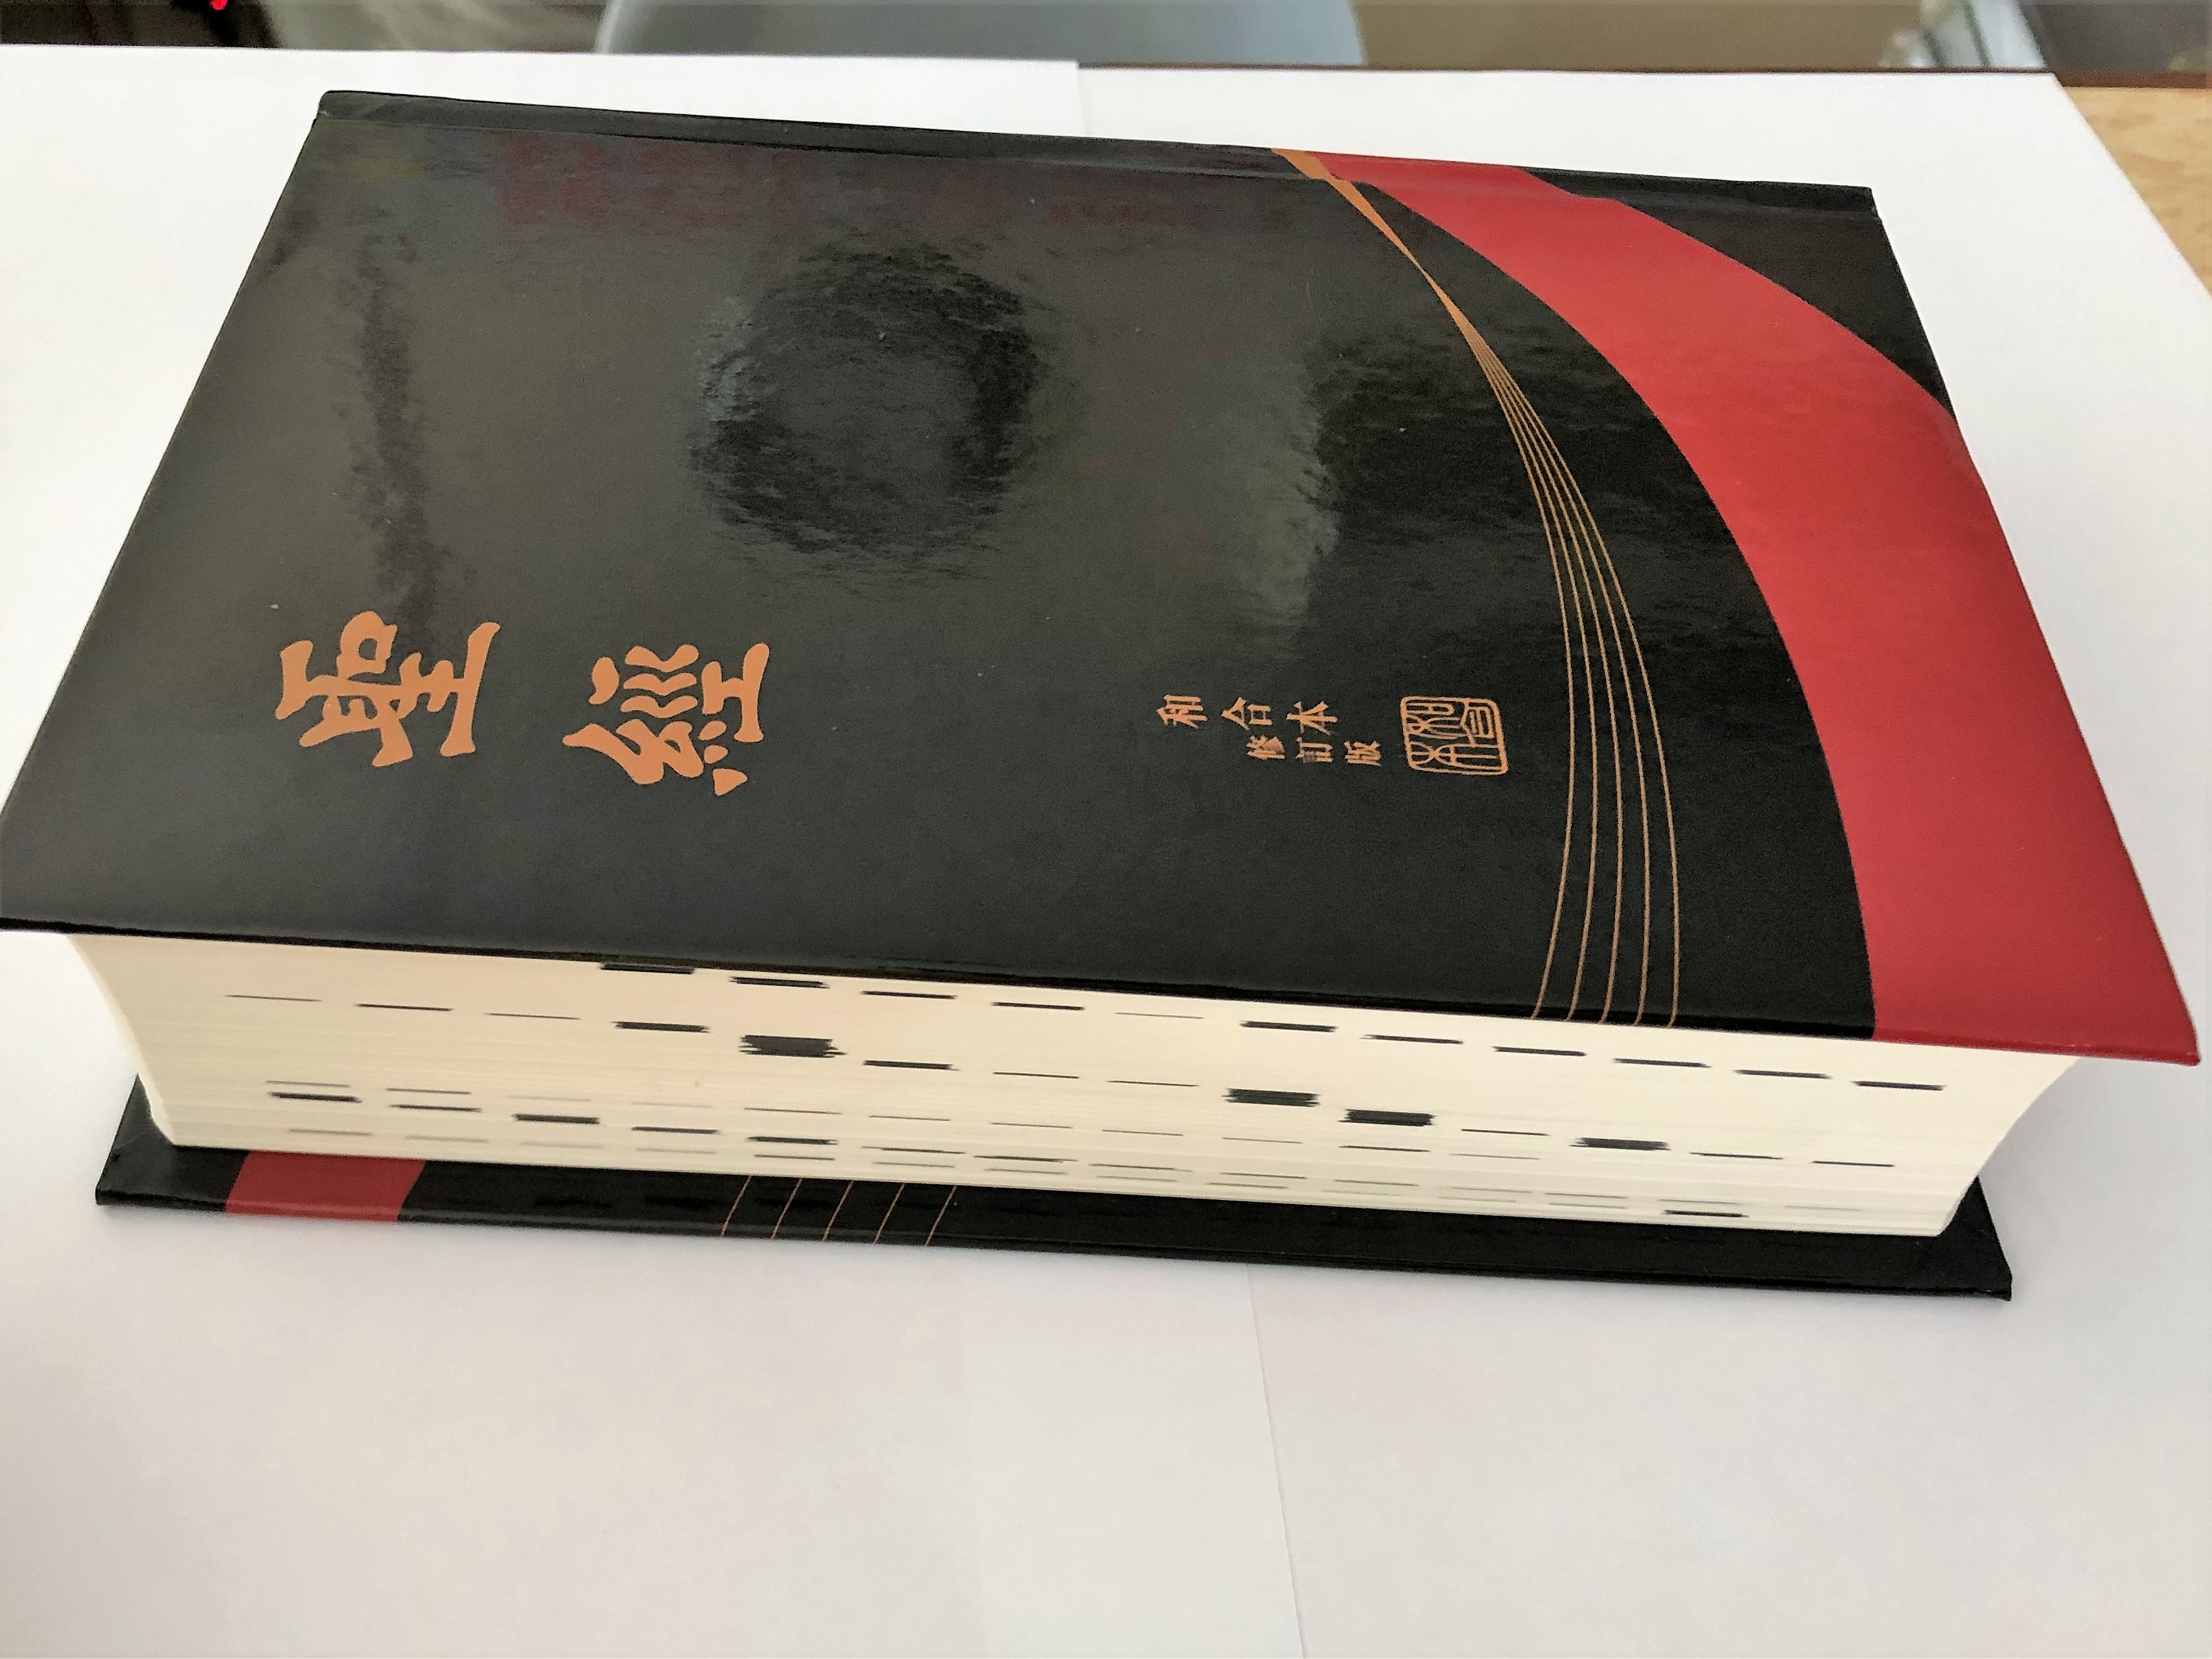 the-holy-bible-revised-chinese-union-version-shen-edition-black-red-hardcover-rcu63abk-hkbs-2011-2-.jpg